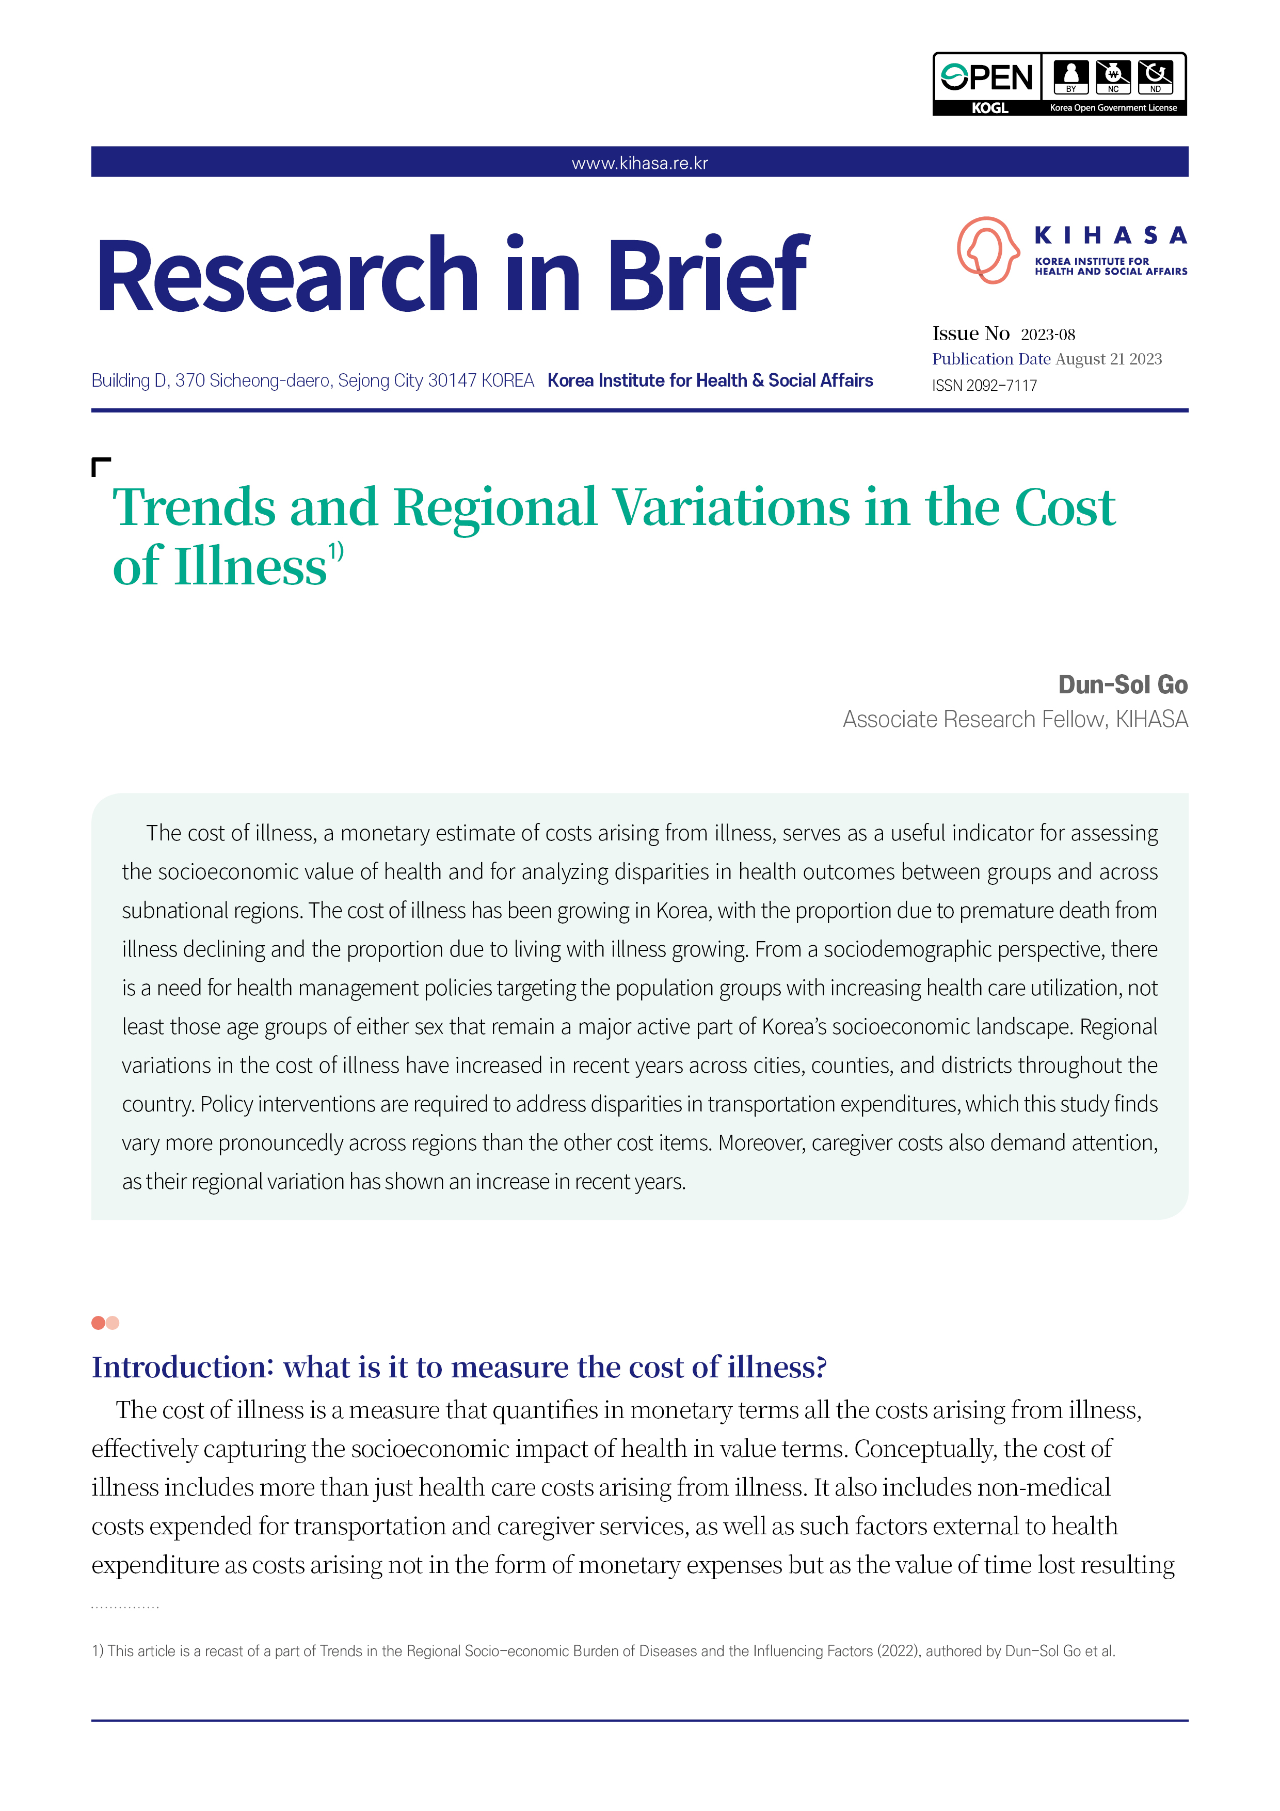 Trends and Regional Variations in the Cost of Illness